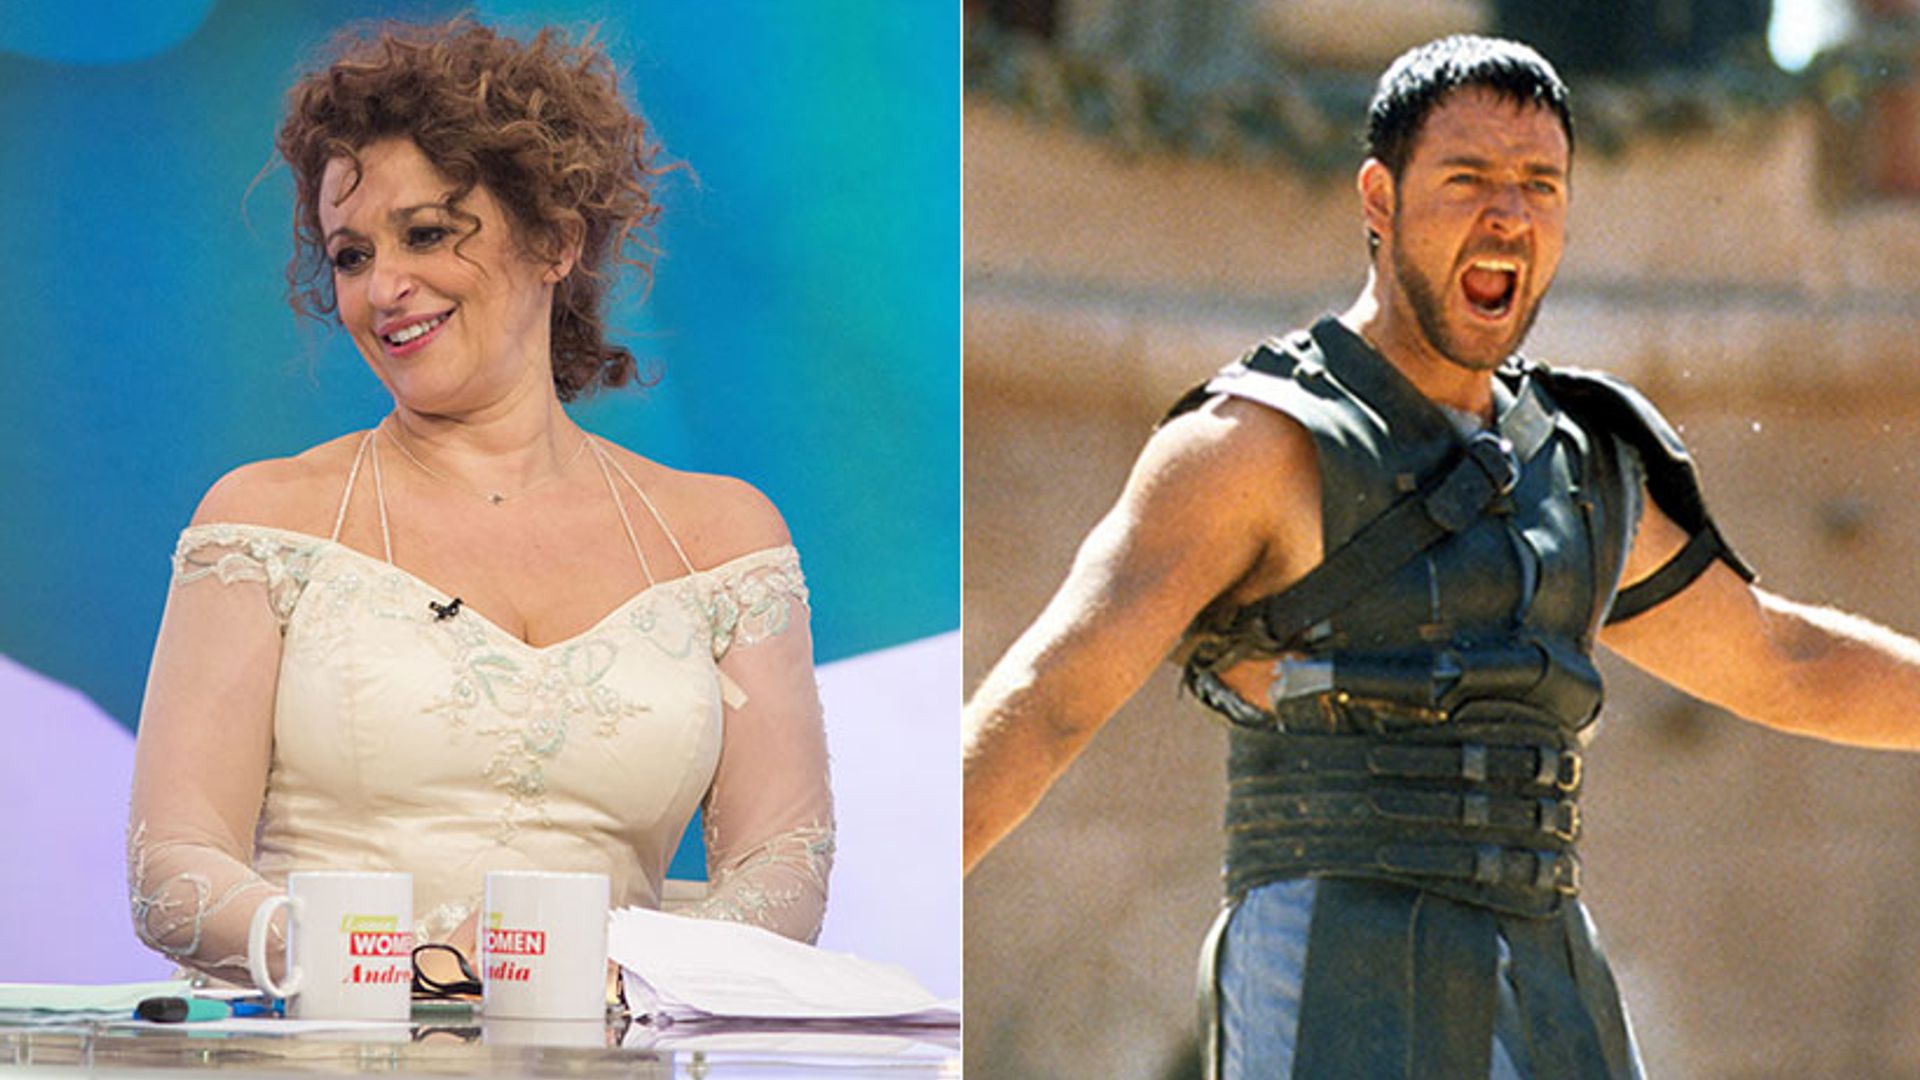 Find out why Nadia Sawalha turned down a role with Russell Crowe in Gladiator